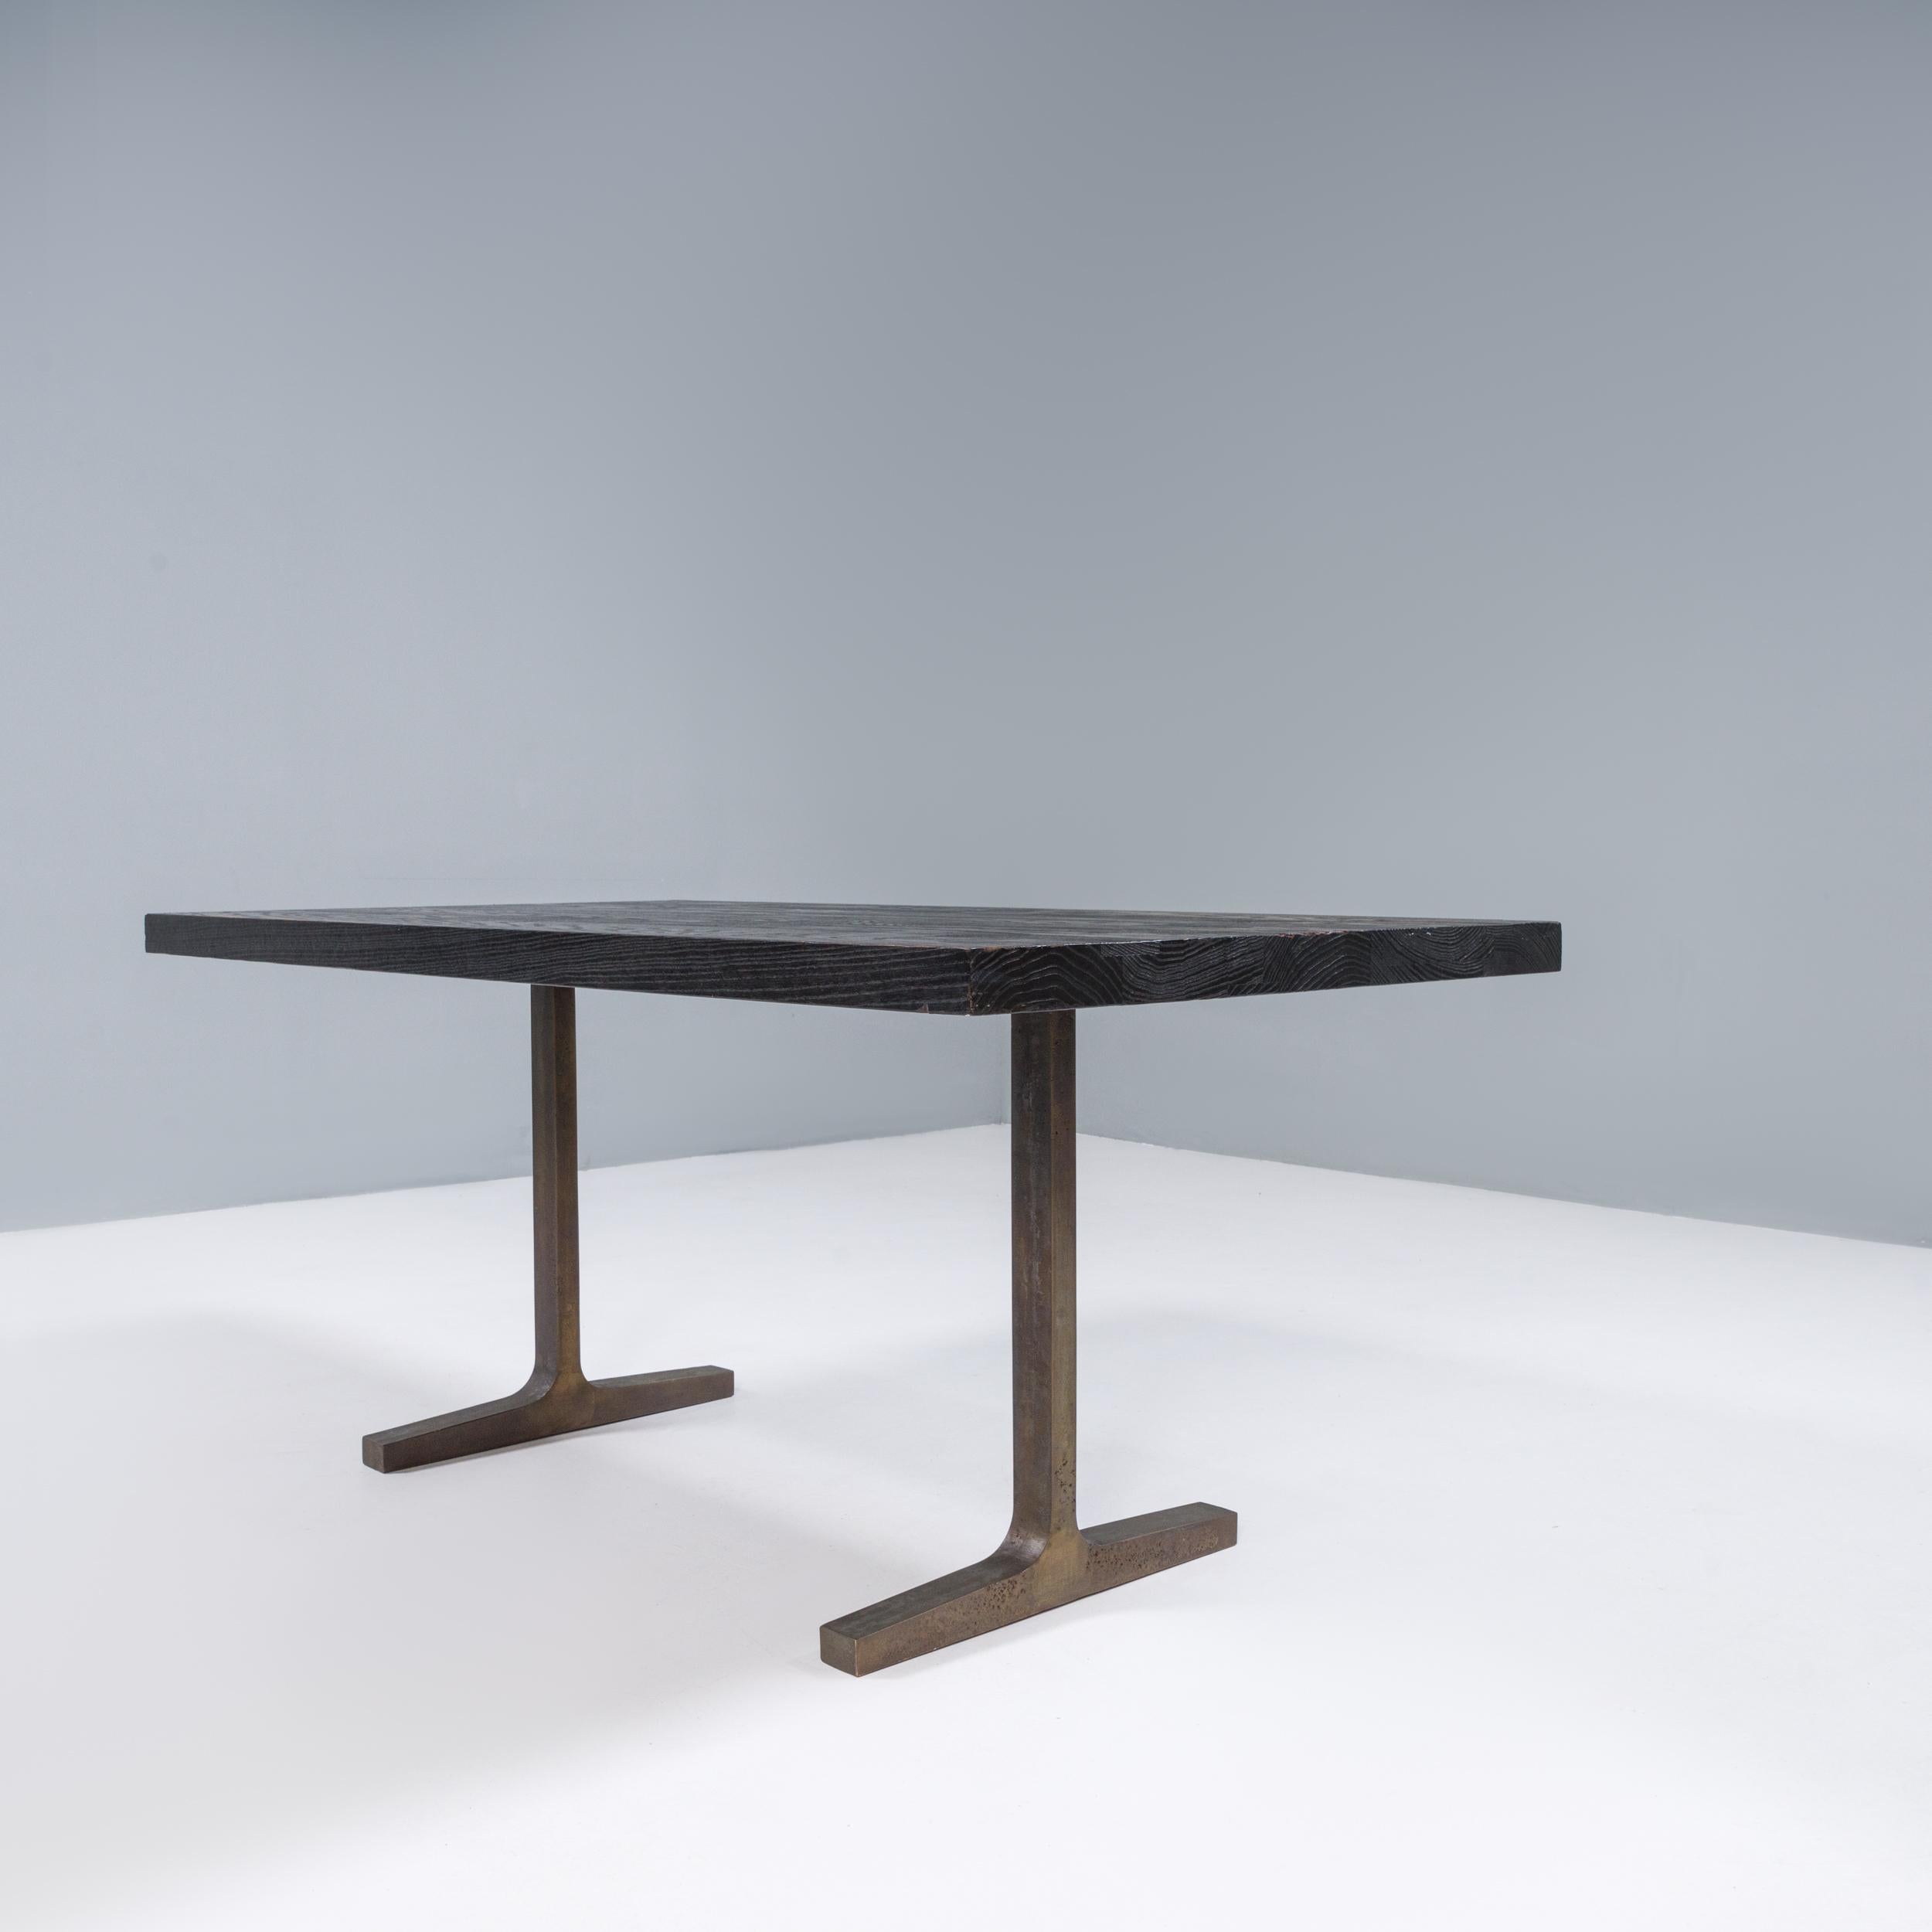 Designed by Tyler Hays in New York and manufactured in BDDW’s Philadelphia studio, this trestle table has been expertly crafted and made to last. 

Constructed from black walnut with a dark oil finish, the tabletop features butterfly joints in